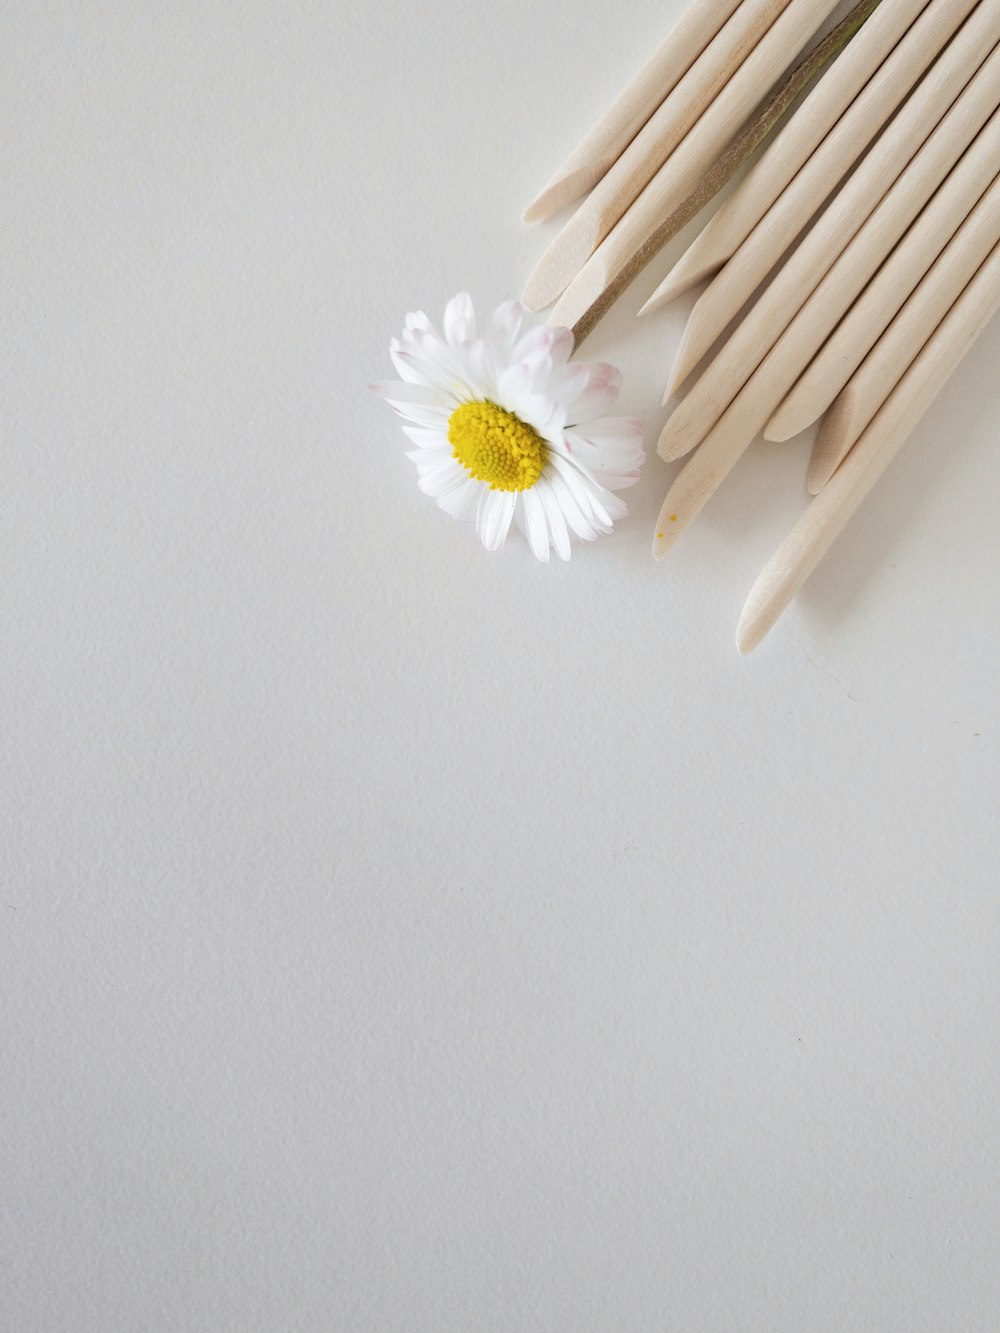 a white flower sitting on top of a wooden comb